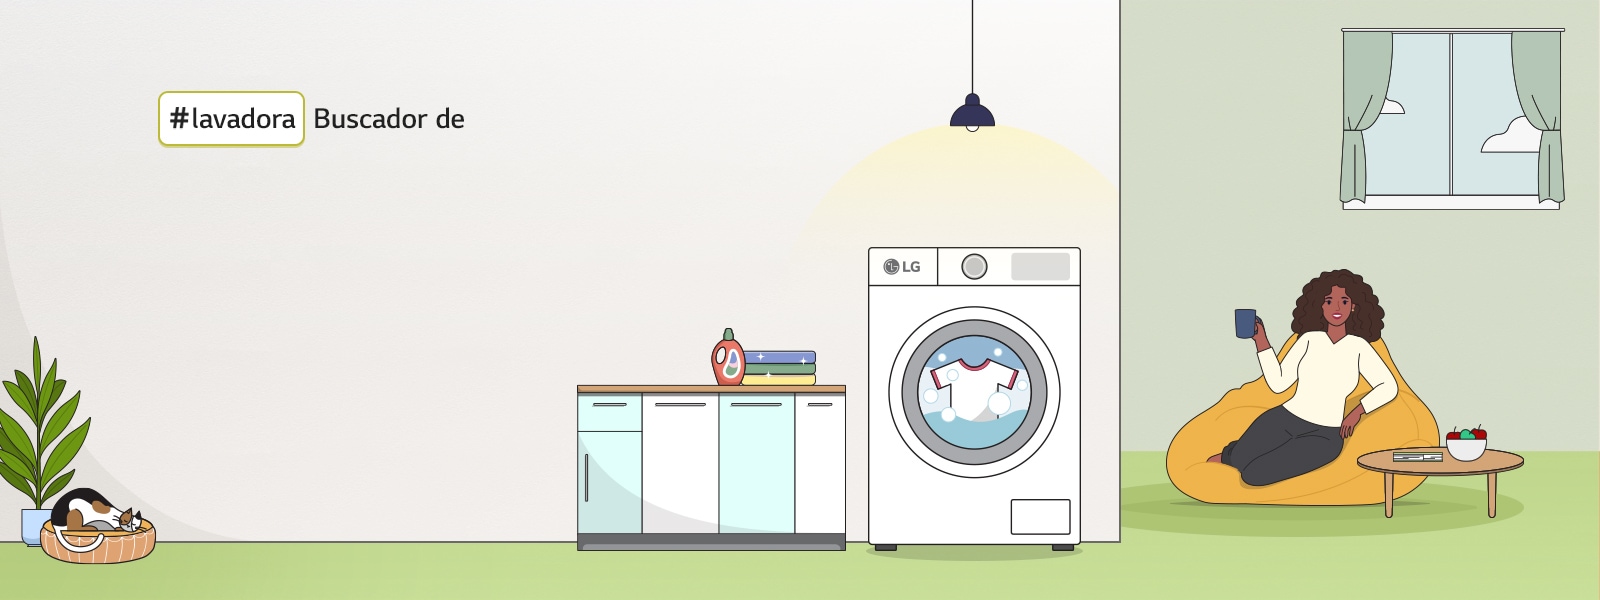 The washing machine illustration image and character are shown.